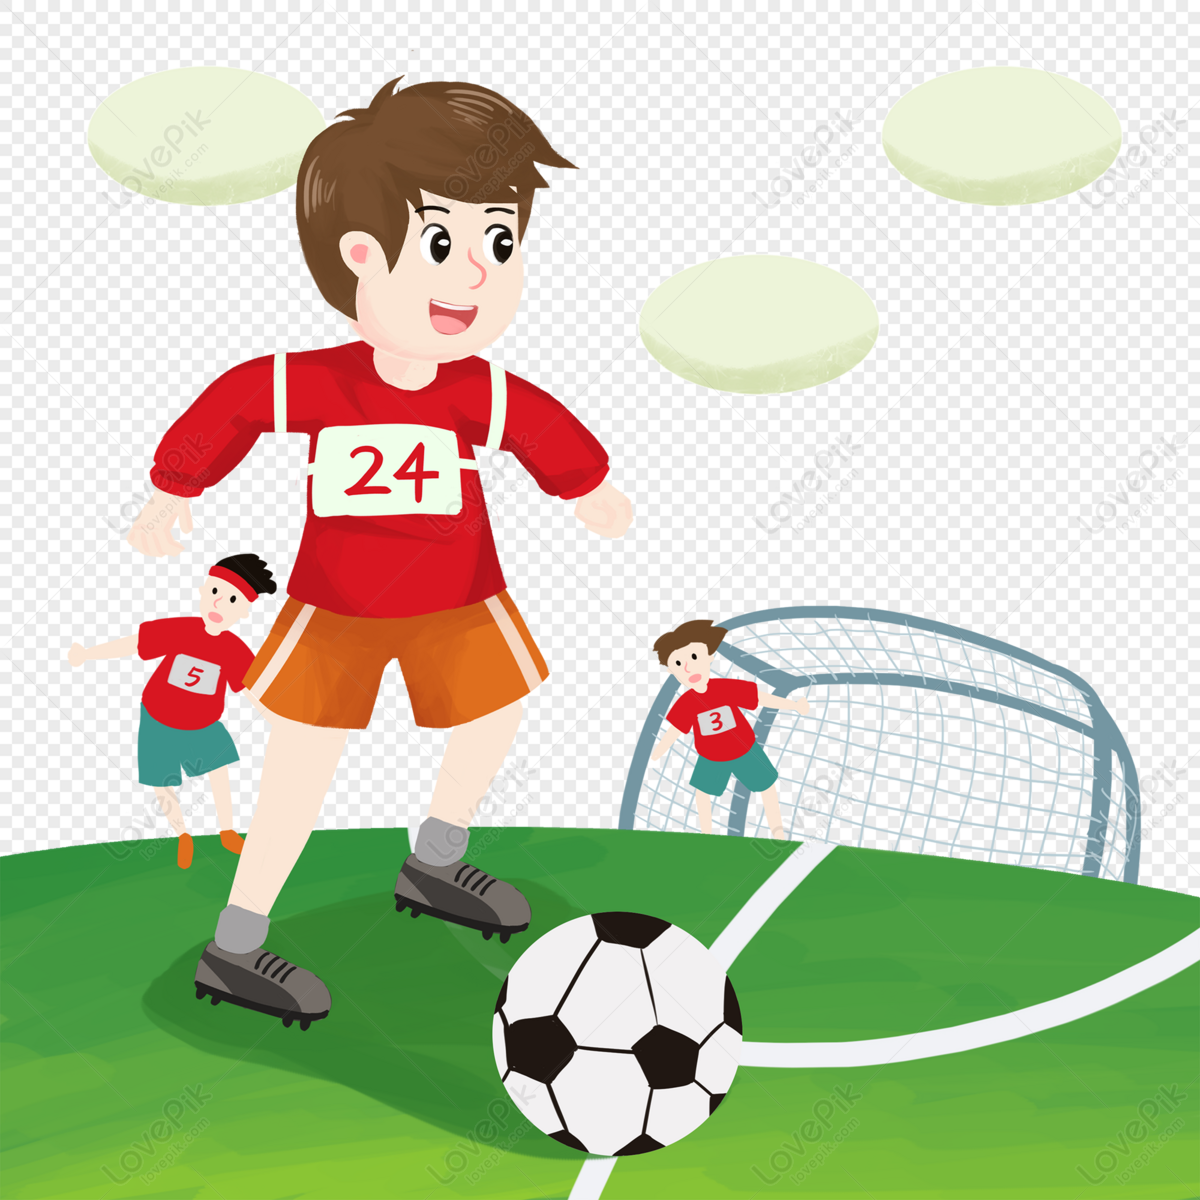 children playing football png image and psd file for free download lovepik 401068542